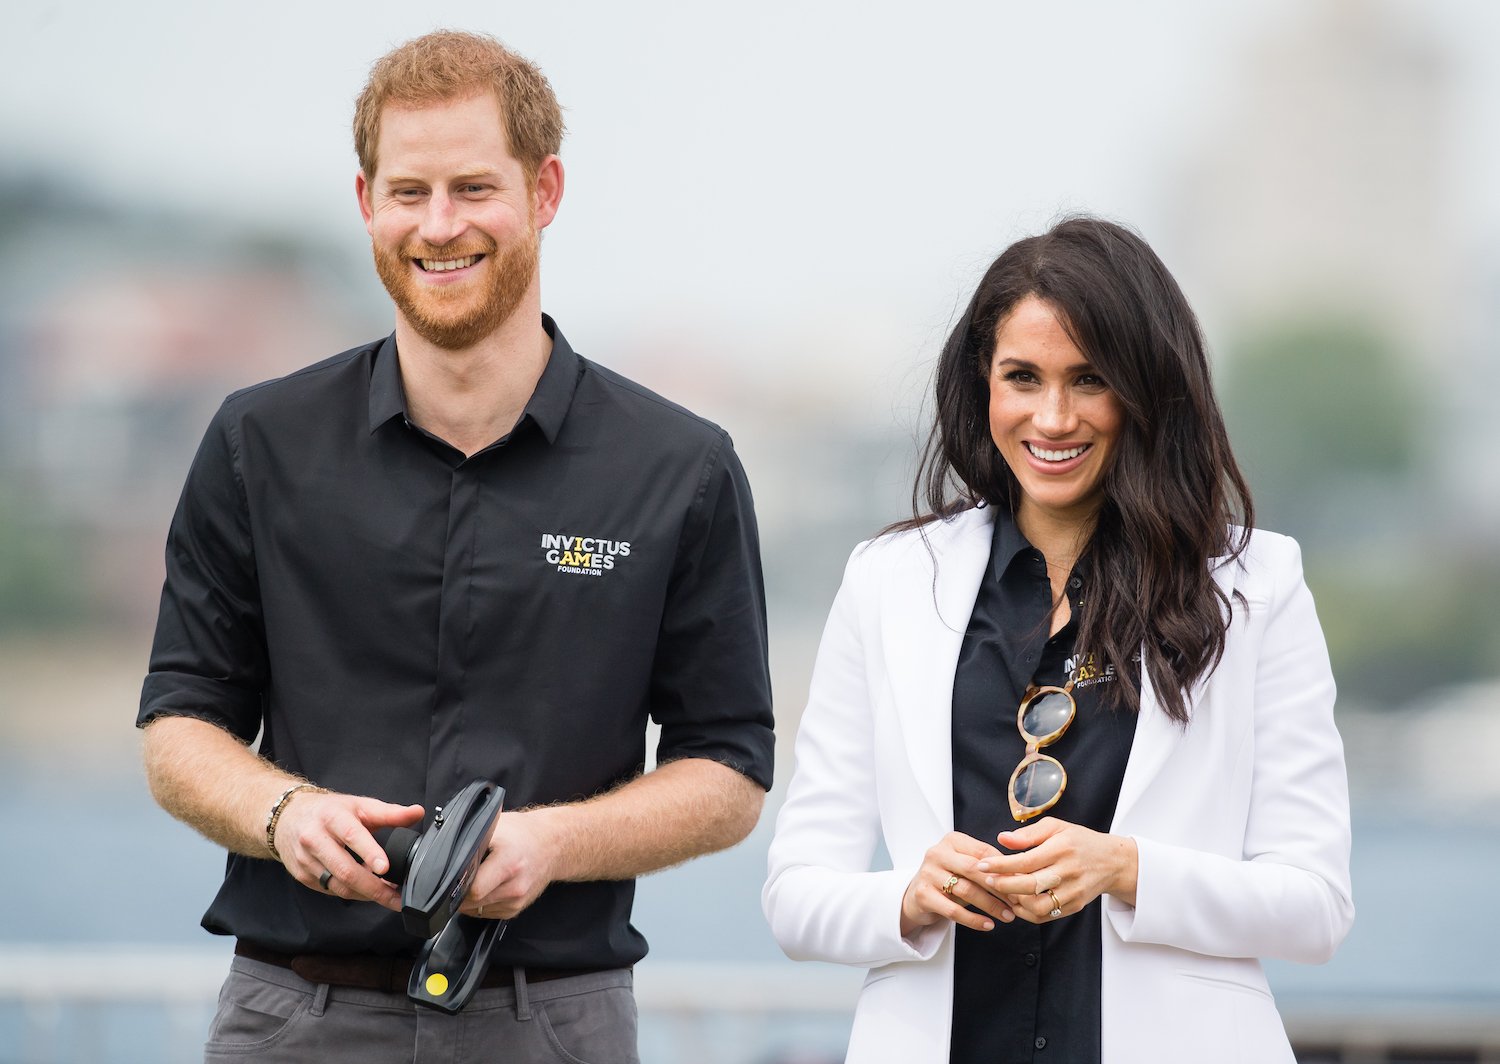 Prince Harry and Meghan Markle attend the Jaguar Land Rover Driving Challenge at the Invictus Games on October 20, 2018 in Sydney, Australia